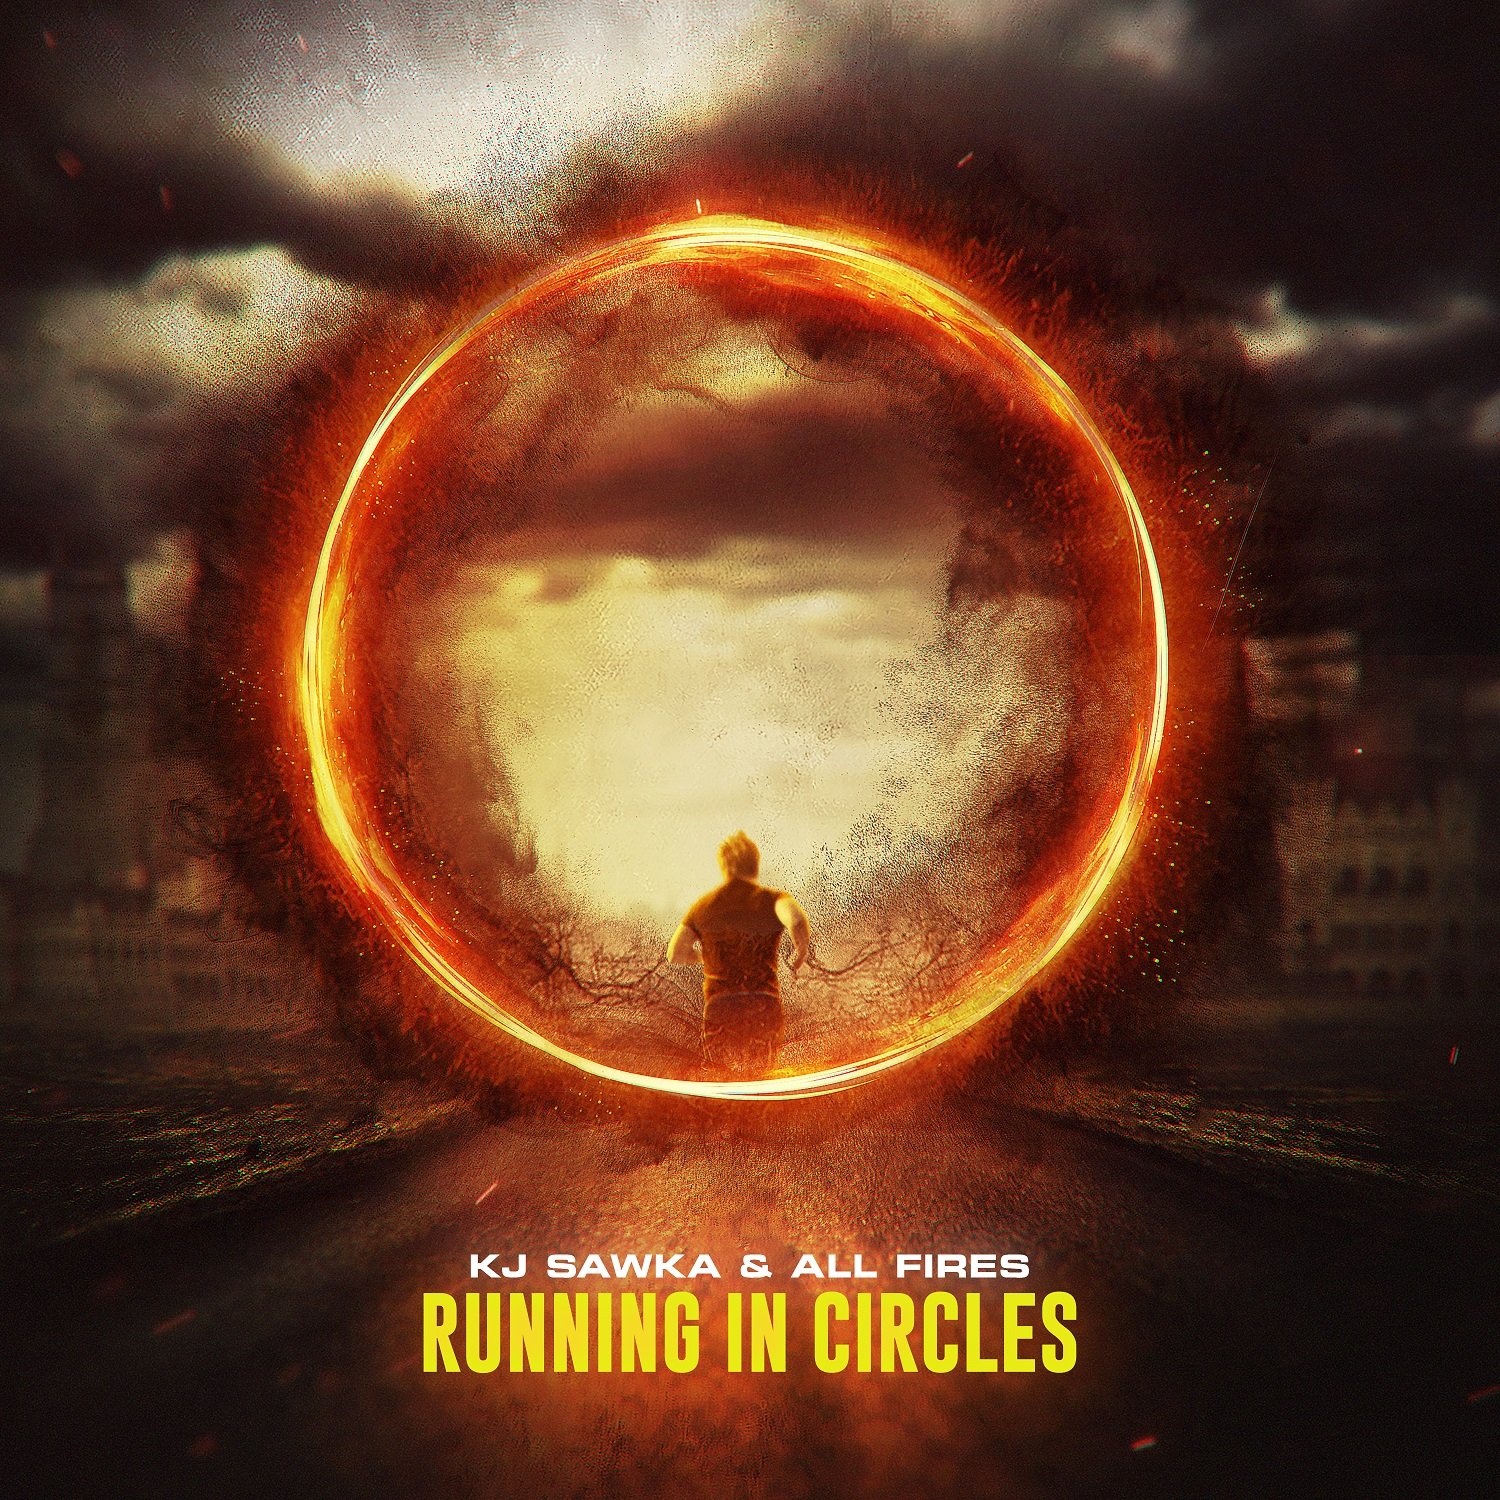 KJ Sawka teams up with All Fires again for new drum & bass heater, “Running in Circles”